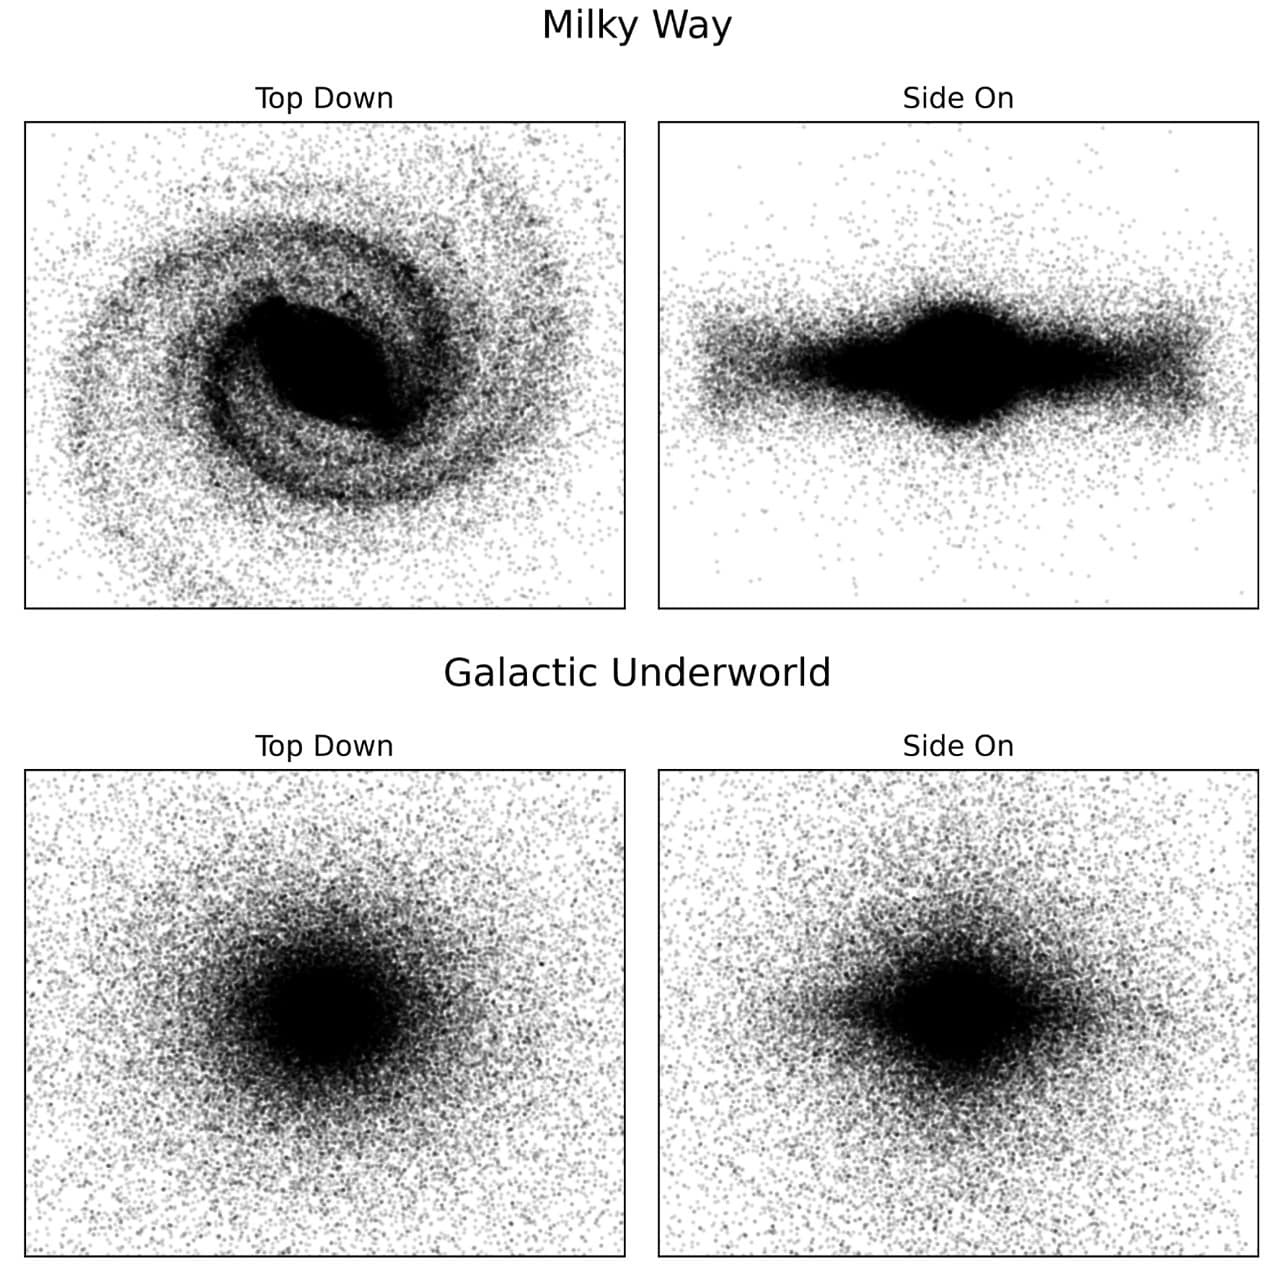 Chart of the visible Milky Way galaxy (top) versus the galactic underworld